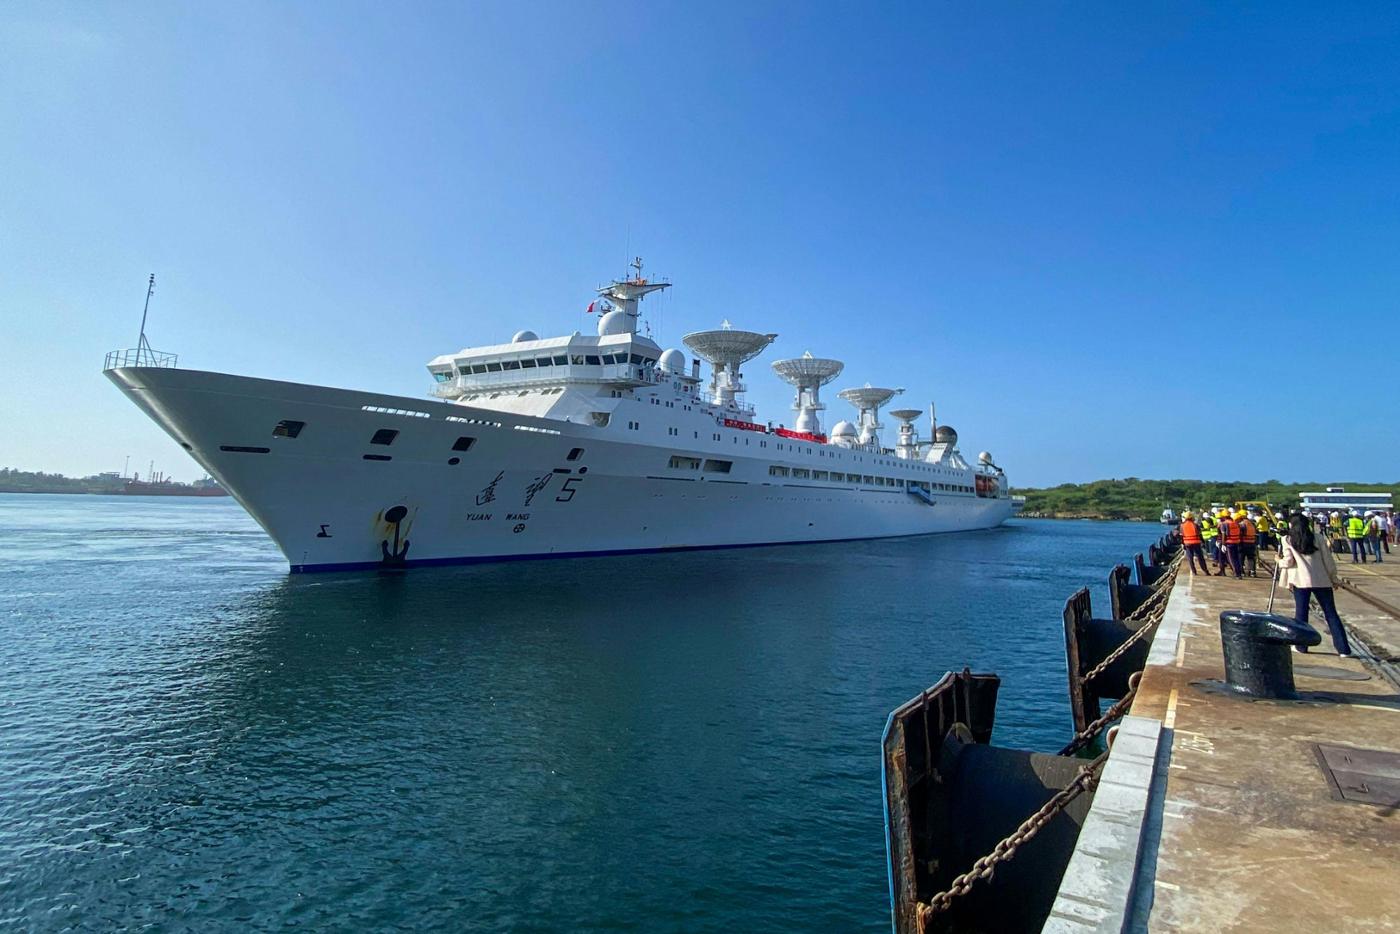 China has globally reaching naval capabilities. China’s military is present in the Baltic and Mediterranean seas by way of exercises and port visits. Pictured: Chinese research ship Yuan Wang 5, also called ‘spy ship’ docks at Sri Lanka’s Hambantota port on 16 August 2022. © CNN
)